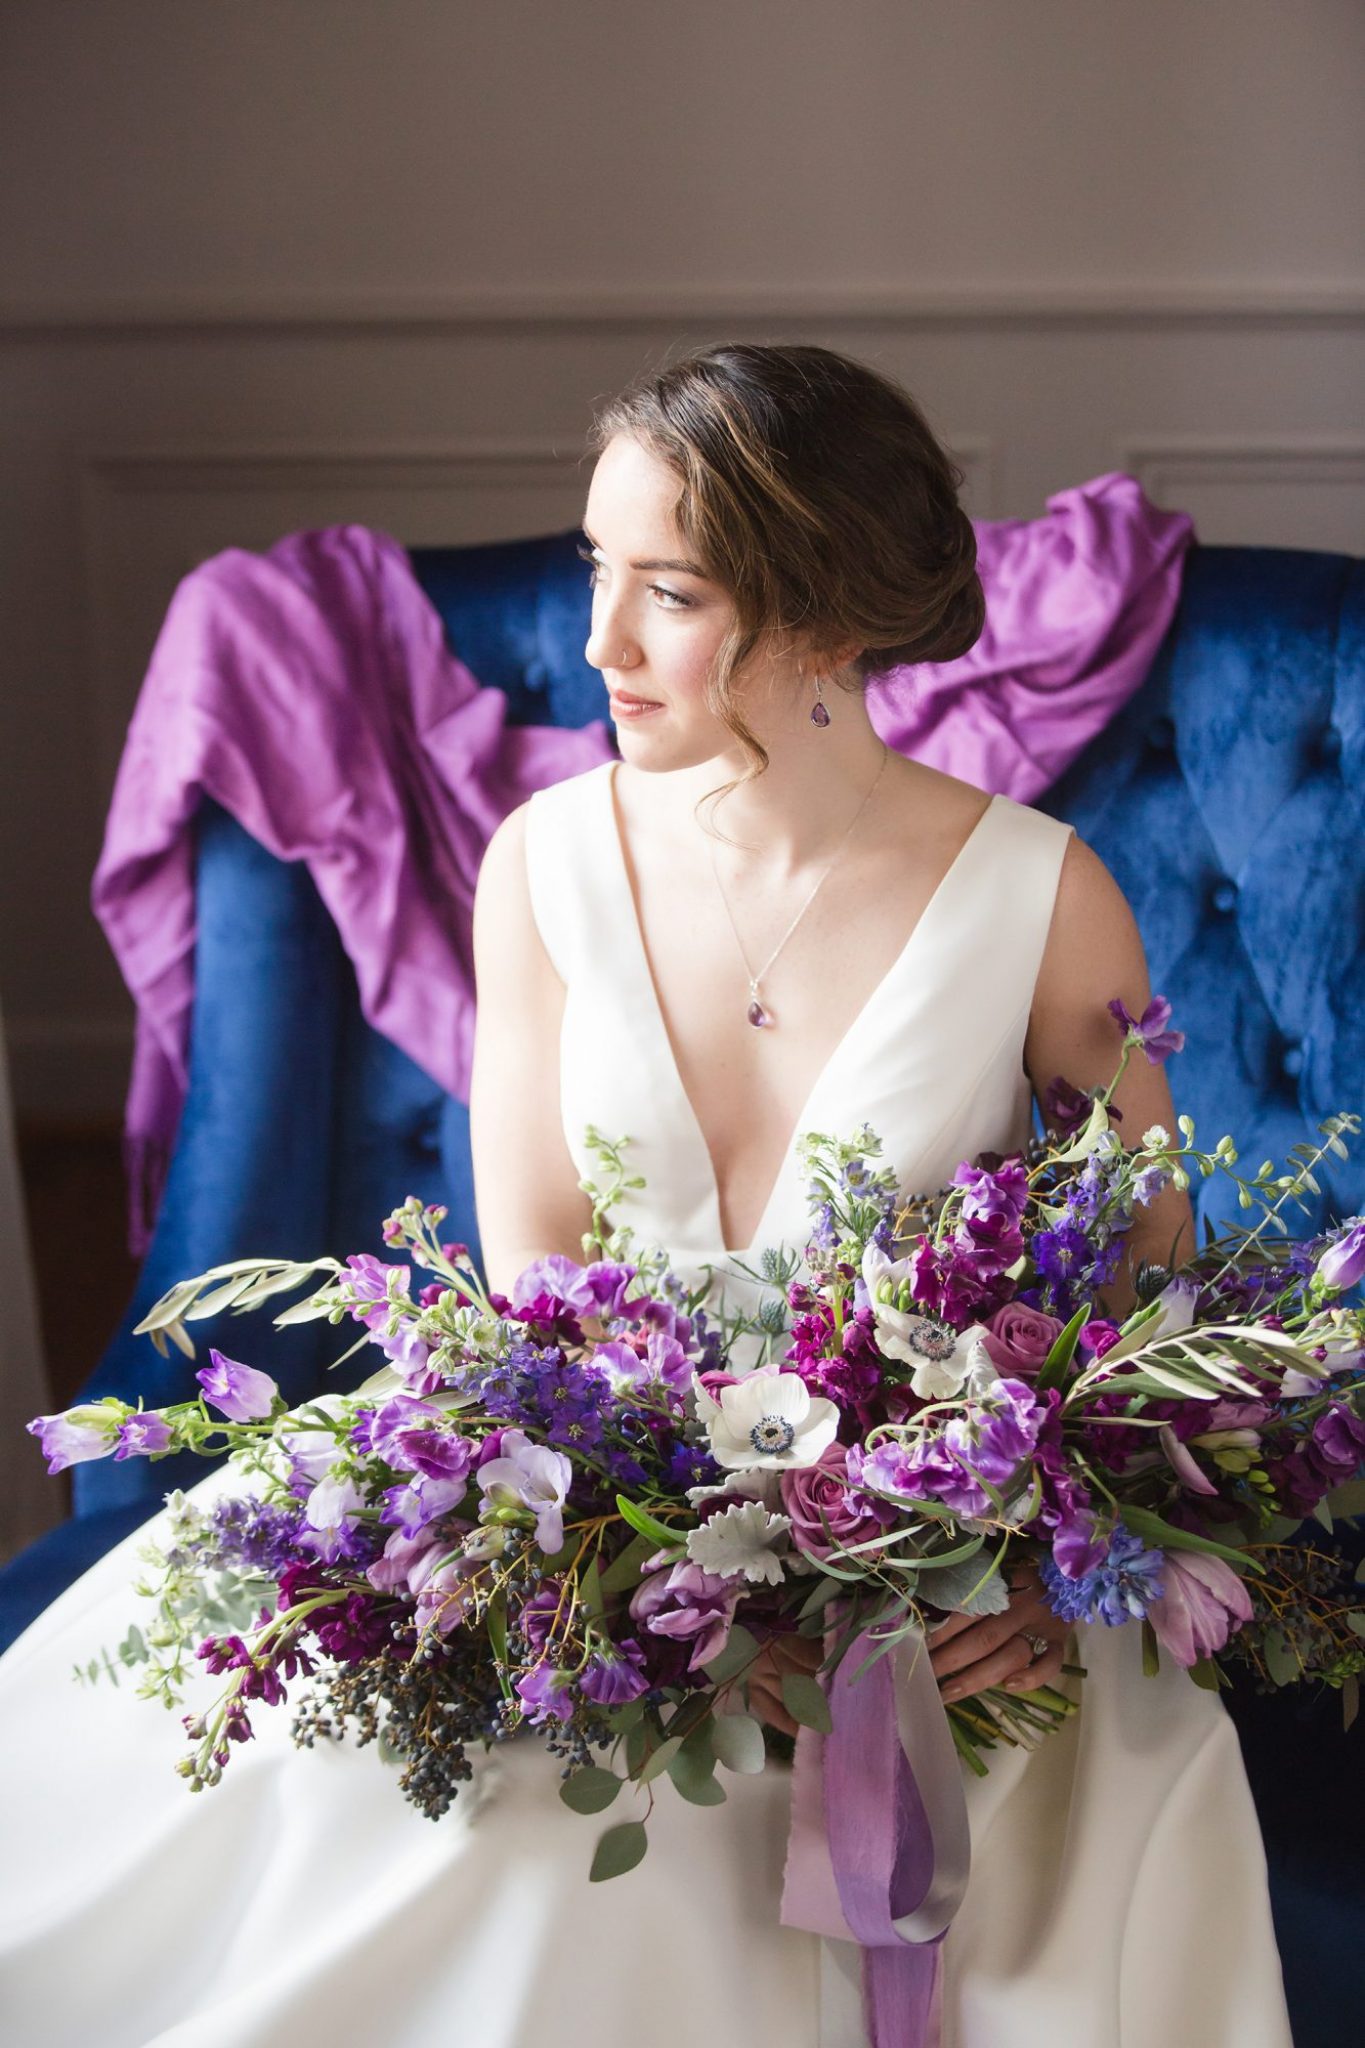 ideas to choose the beauty and elegance of white and purple wedding flowers 5 1365x2048 - Ideas to Choose the Beauty and Elegance of White and Purple Wedding Flowers